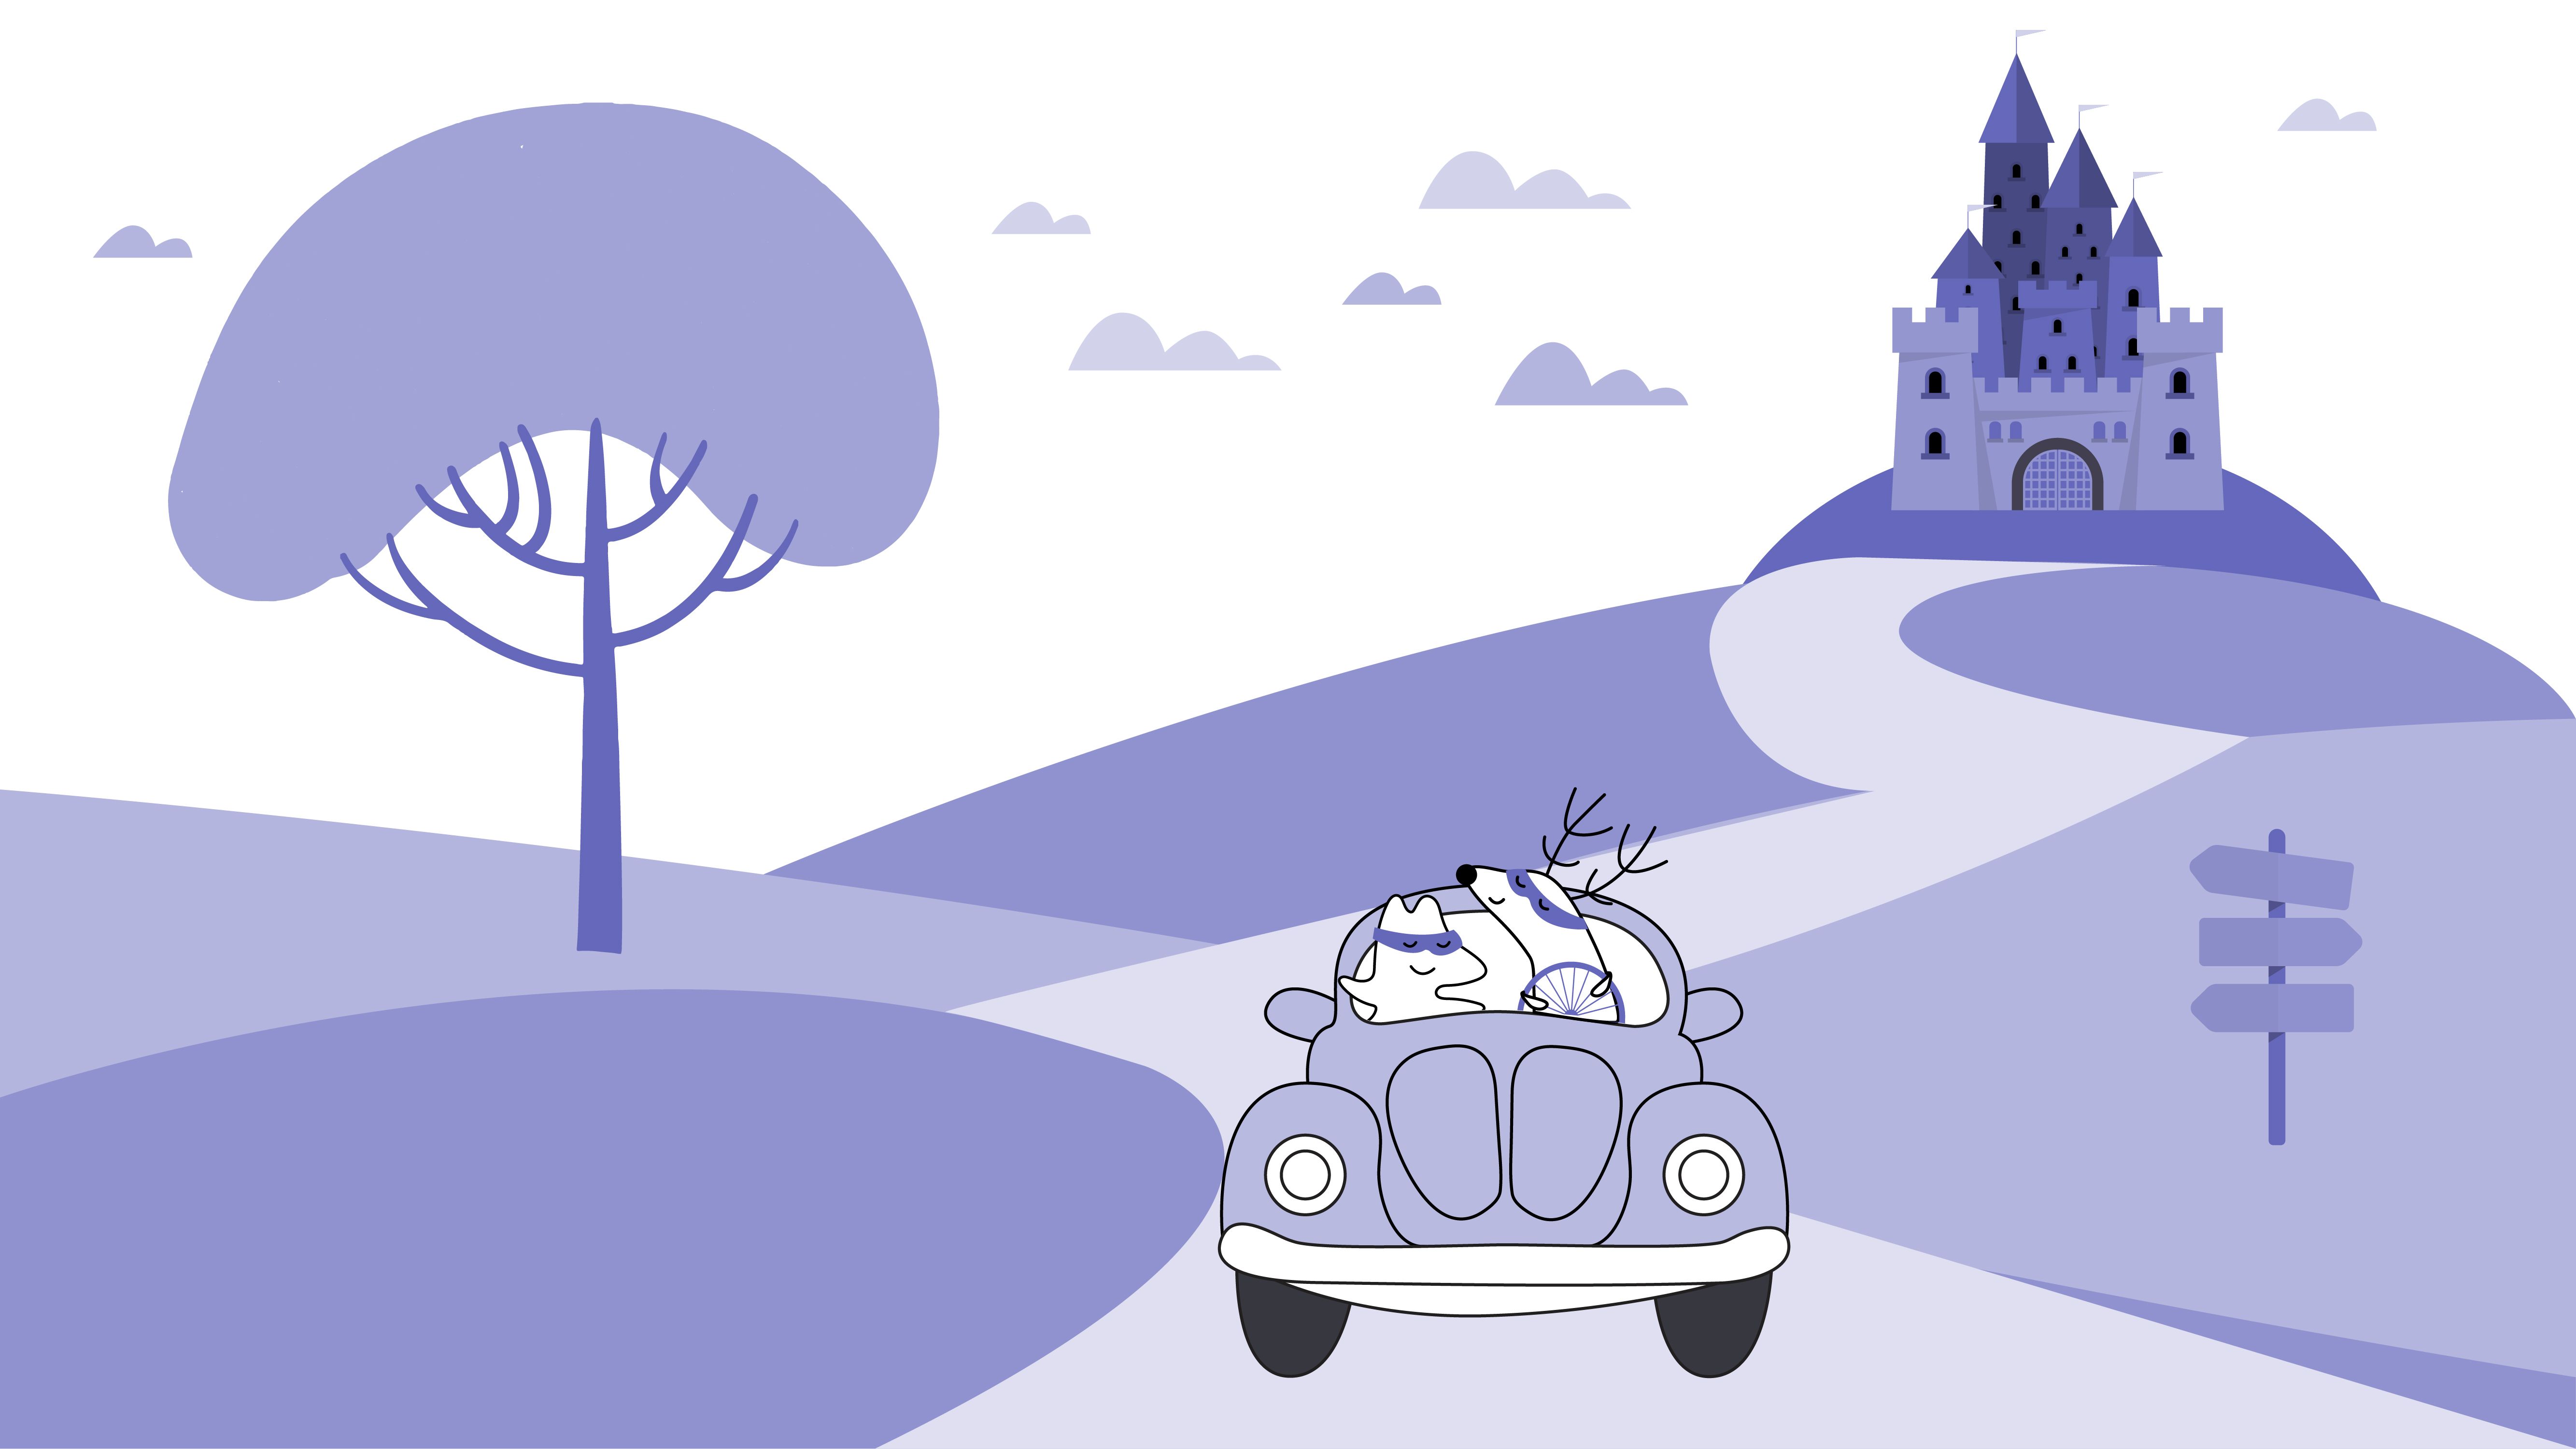  Iggy and Soren are driving the Volkswagen Beetle, riding along the Romantic Road in Germany (can be shown as a road with a castle in the distance).